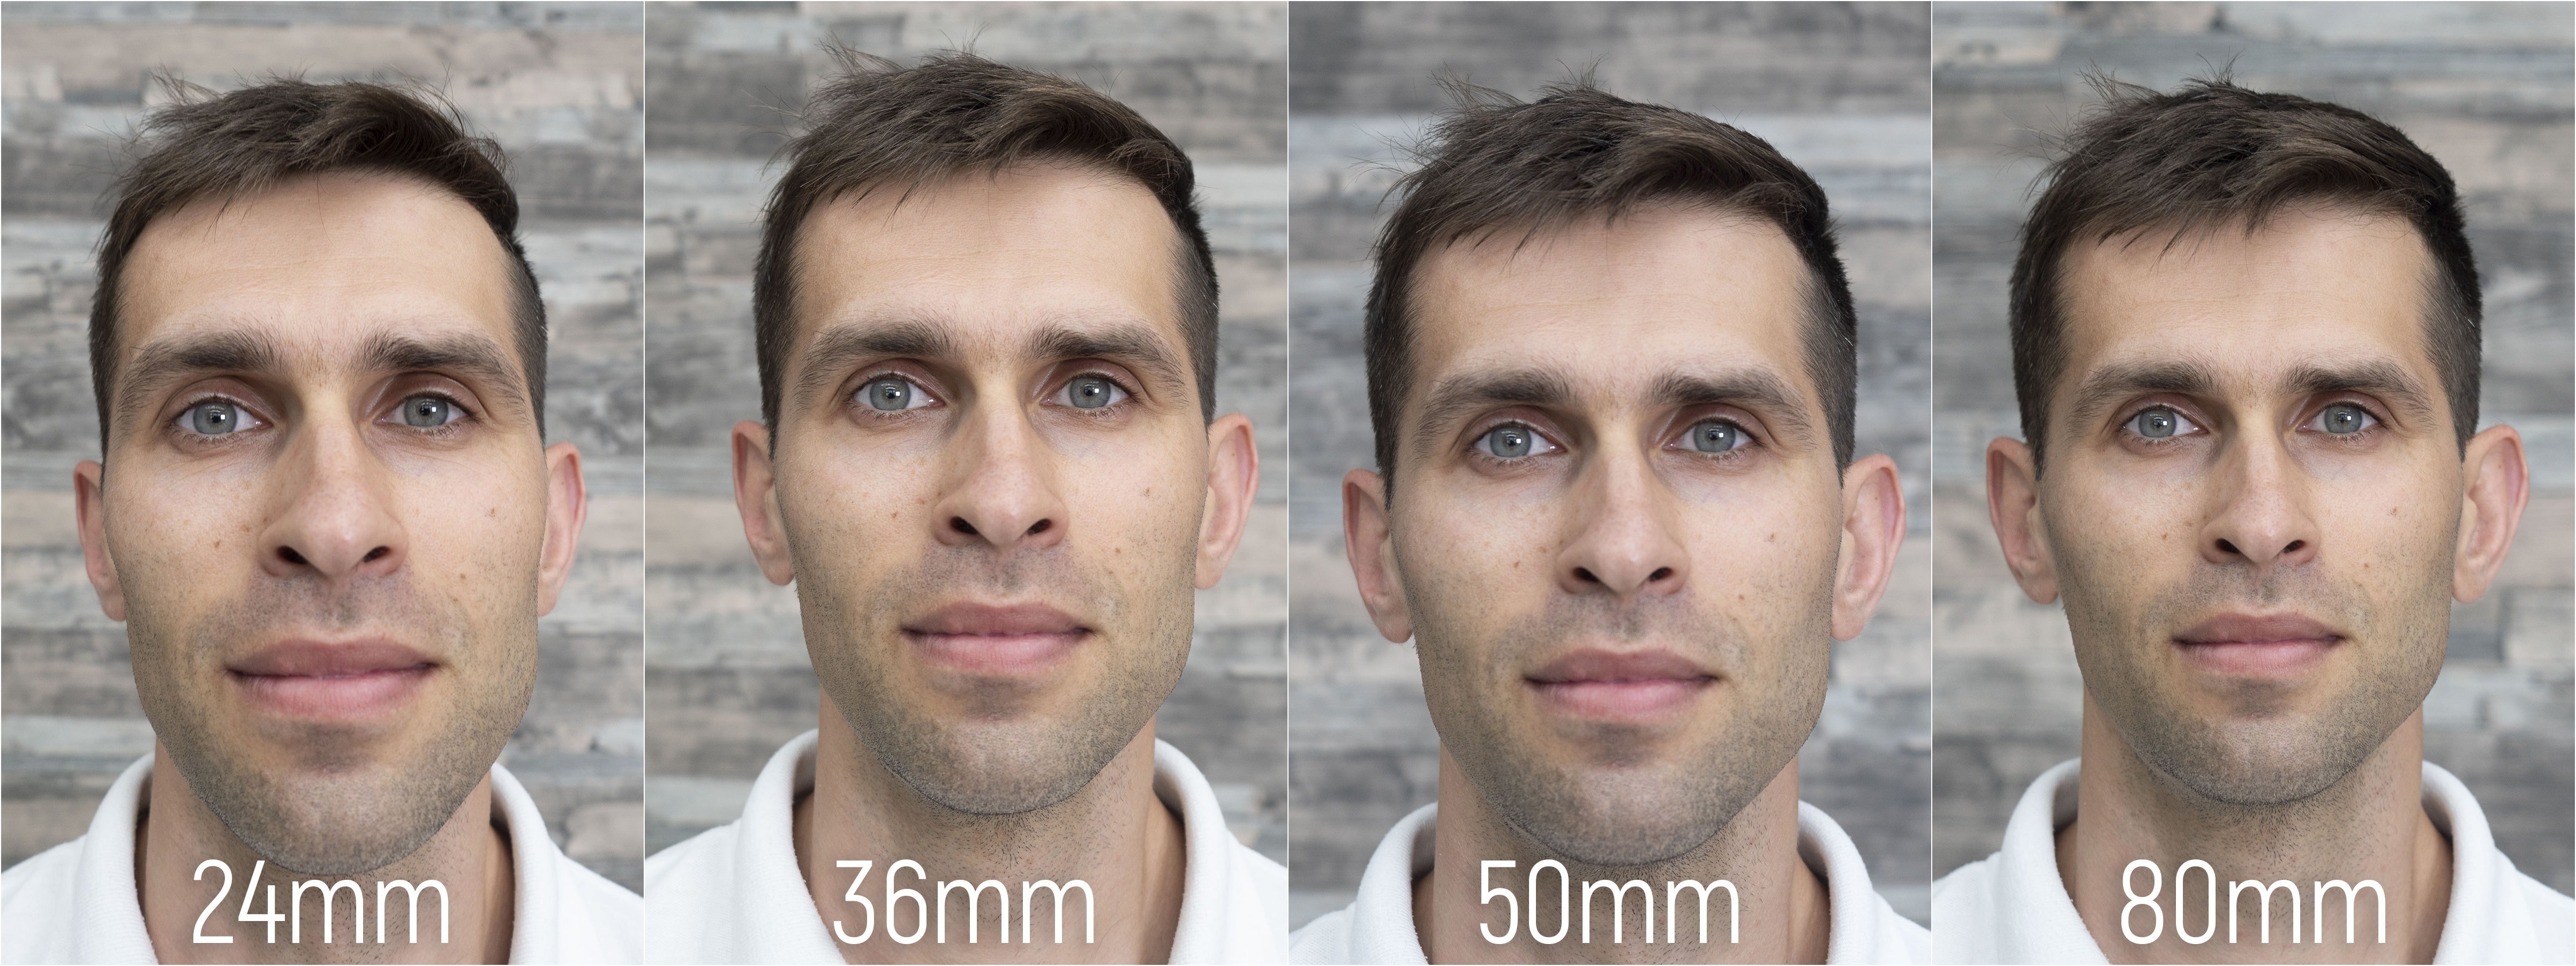 The proportions of the human face change dramatically as you shoot at different focal lengths - OnePlus 7 Pro has the best camera for portraits